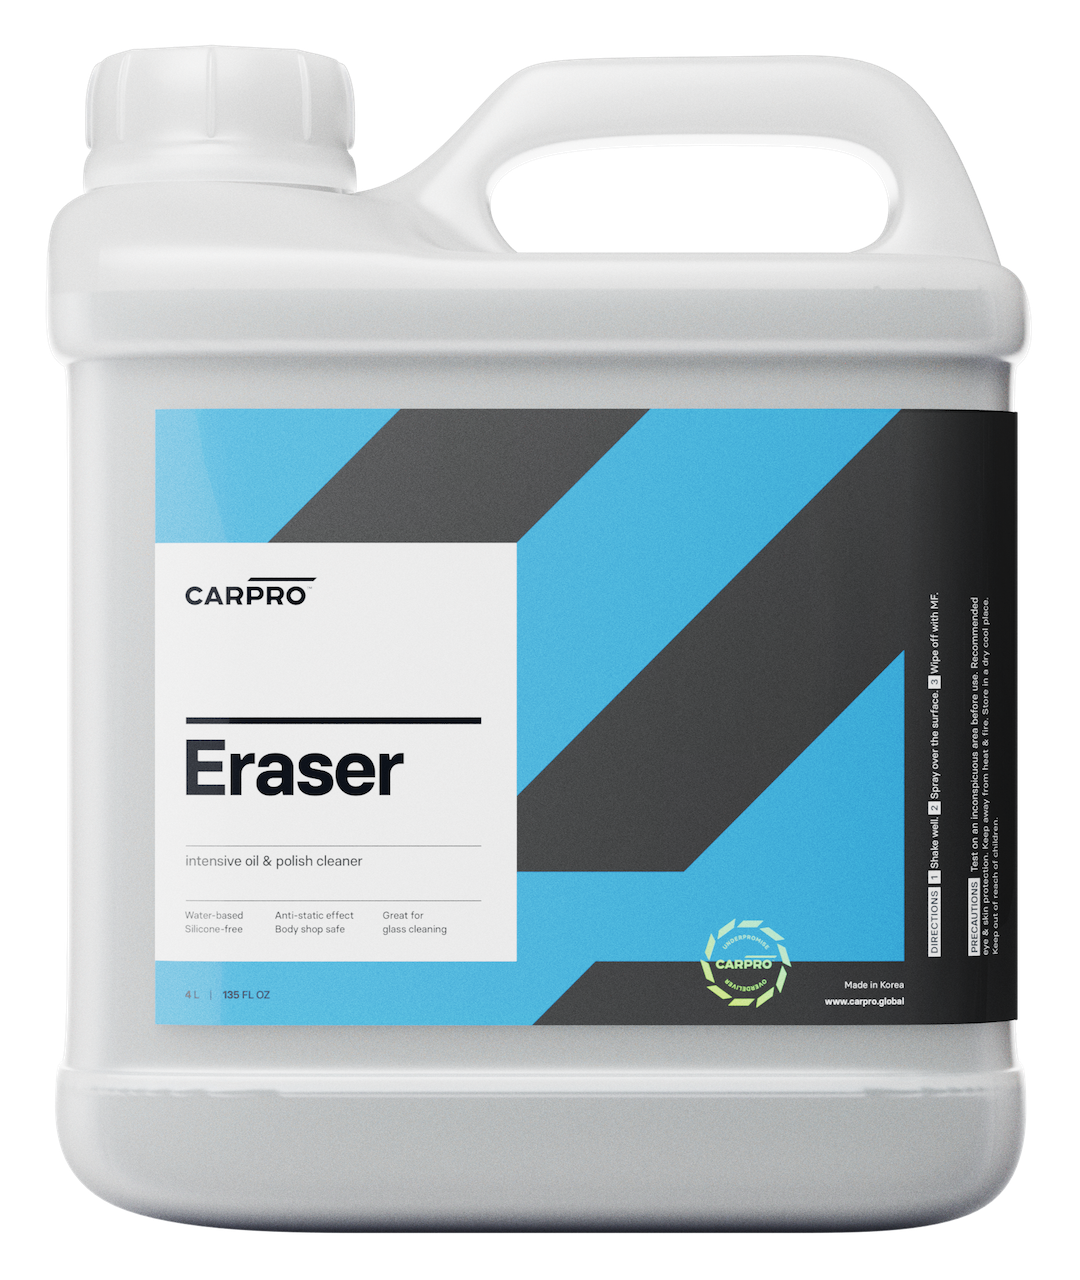 Product Review: CarPro Eraser Intensive Oil and Polish Cleaner